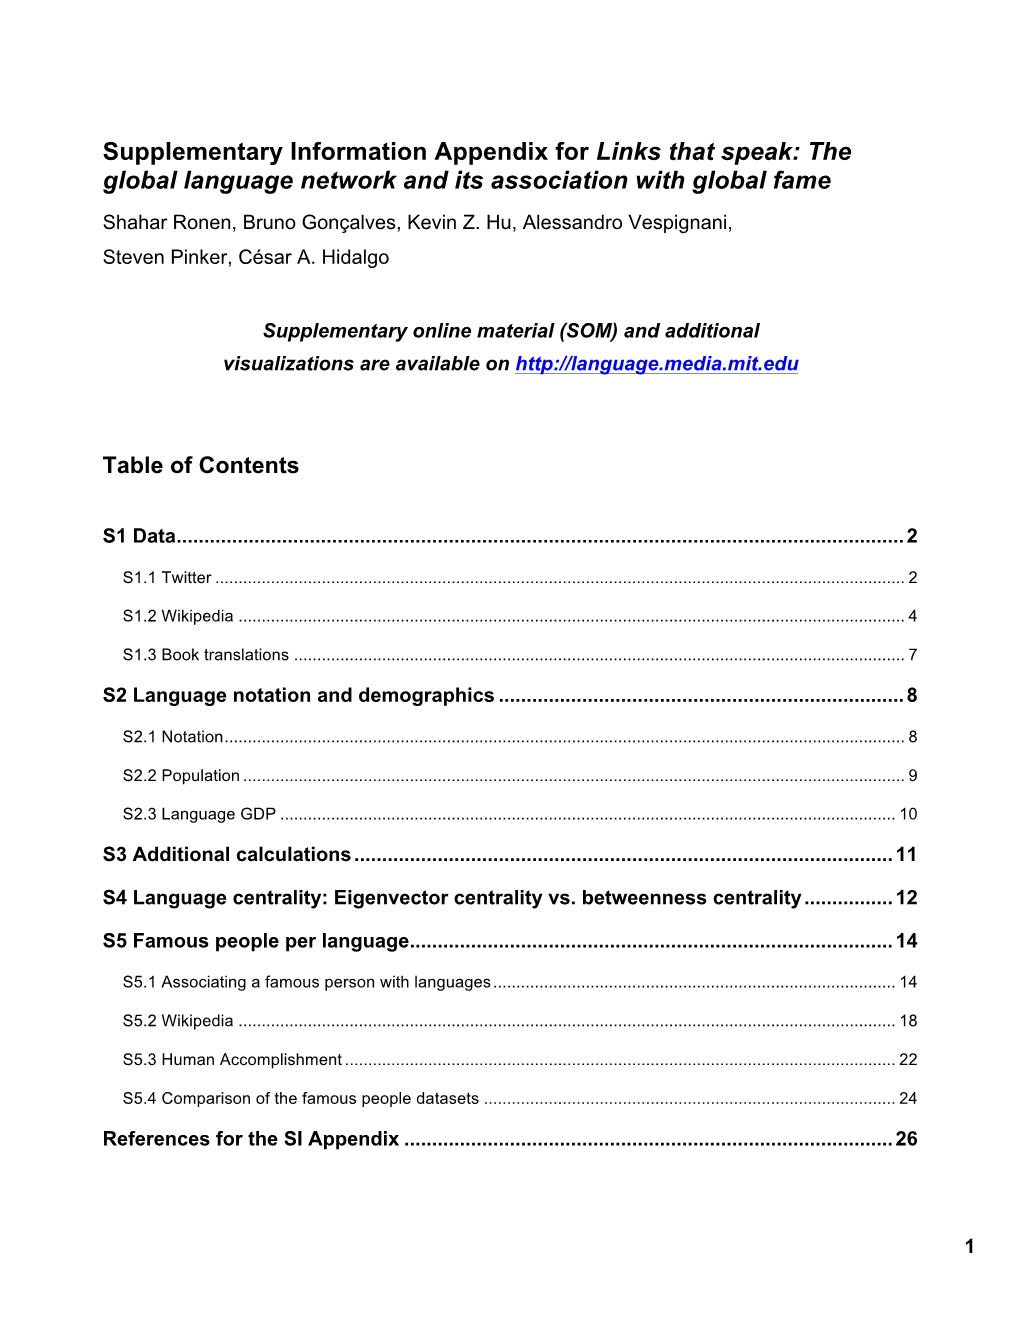 Supplementary Information Appendix for Links That Speak: the Global Language Network and Its Association with Global Fame Shahar Ronen, Bruno Gonçalves, Kevin Z